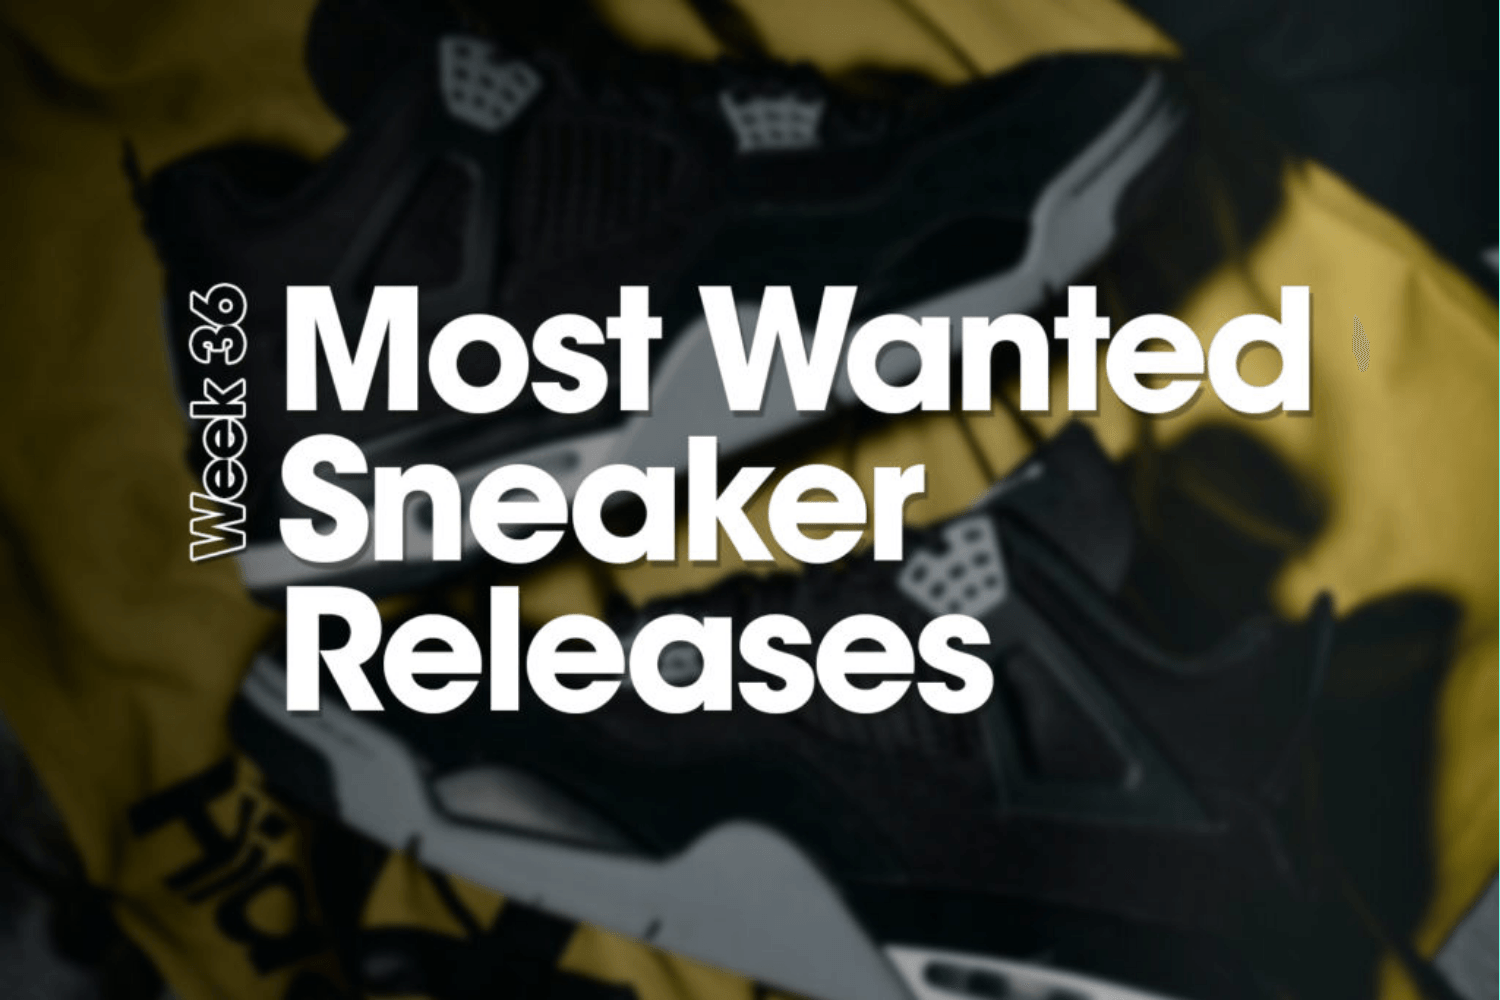 Most Wanted Sneaker Releases - Woche 36